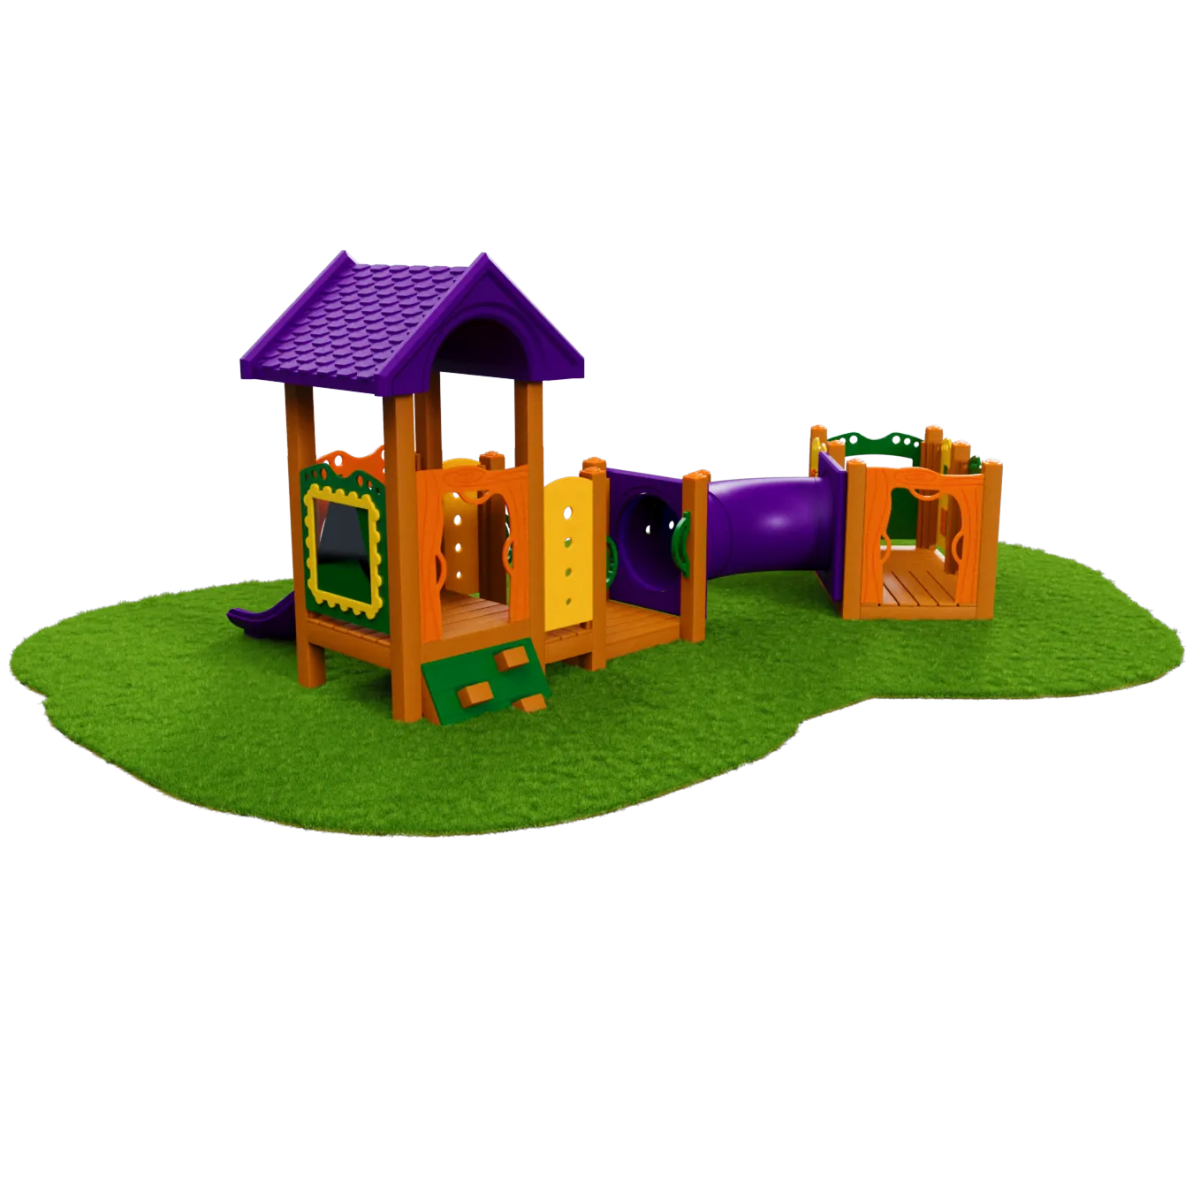 Boone Playset - Toddler Playgrounds - Playtopia, Inc.